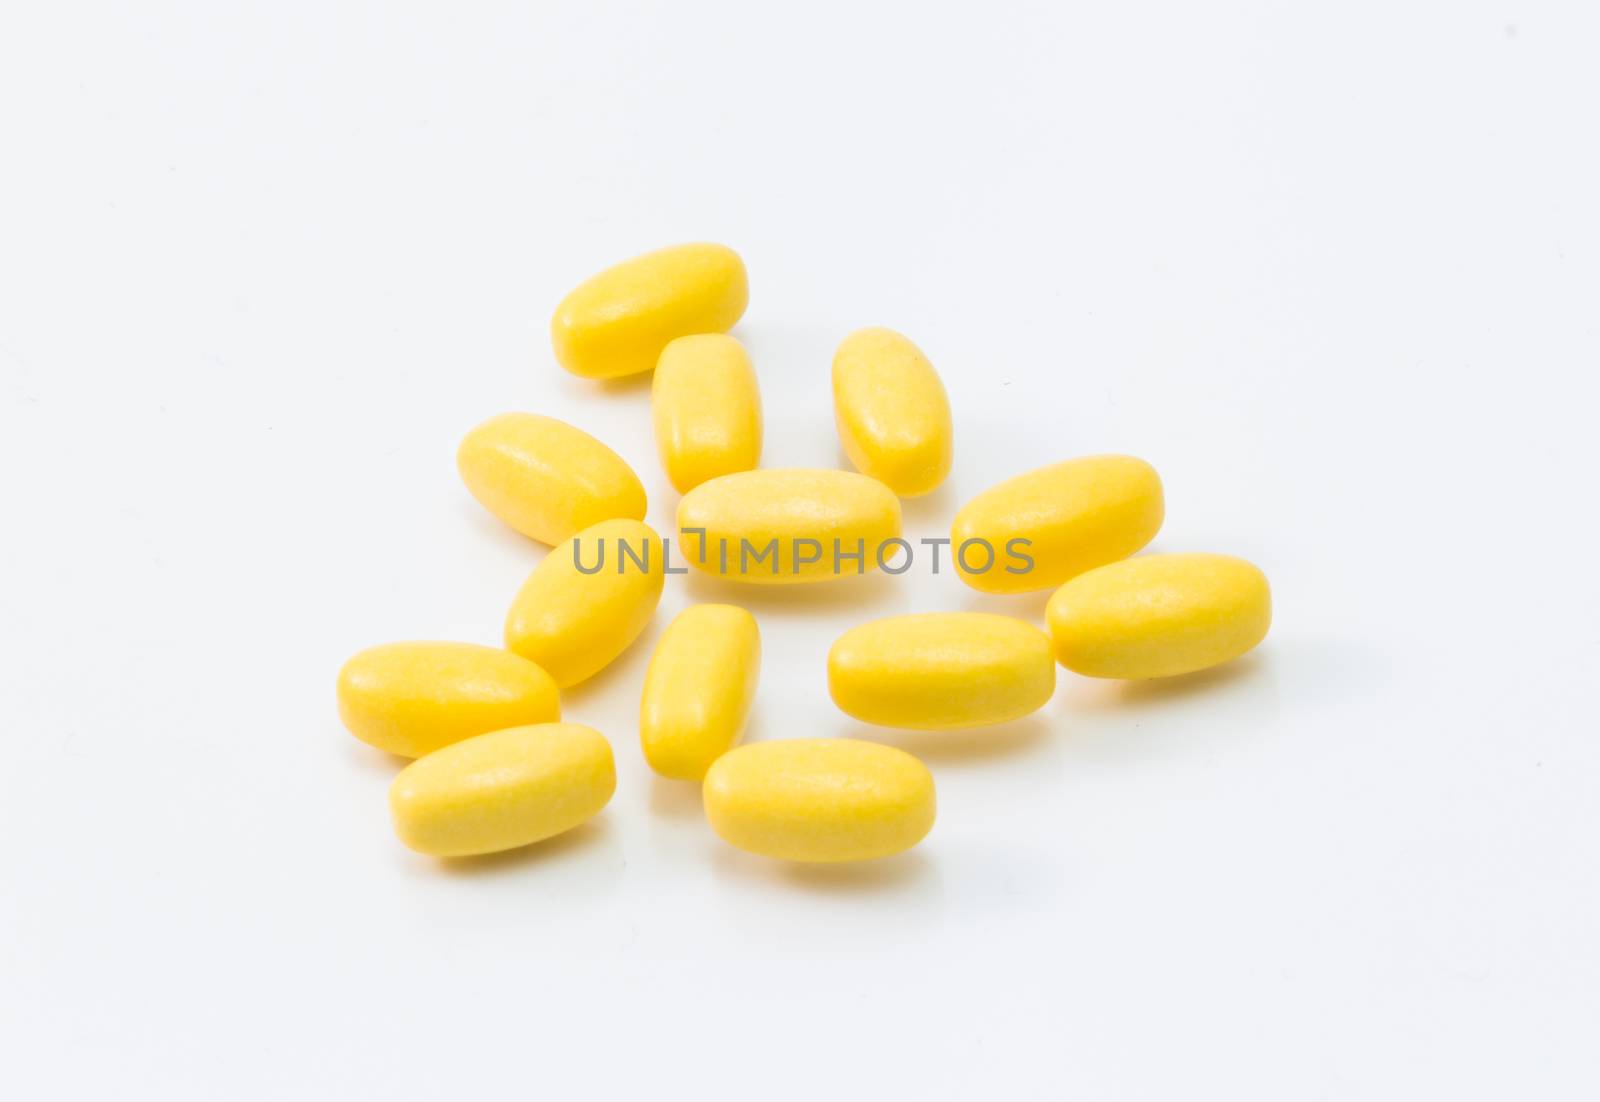 yellow pill isolated on white background close up